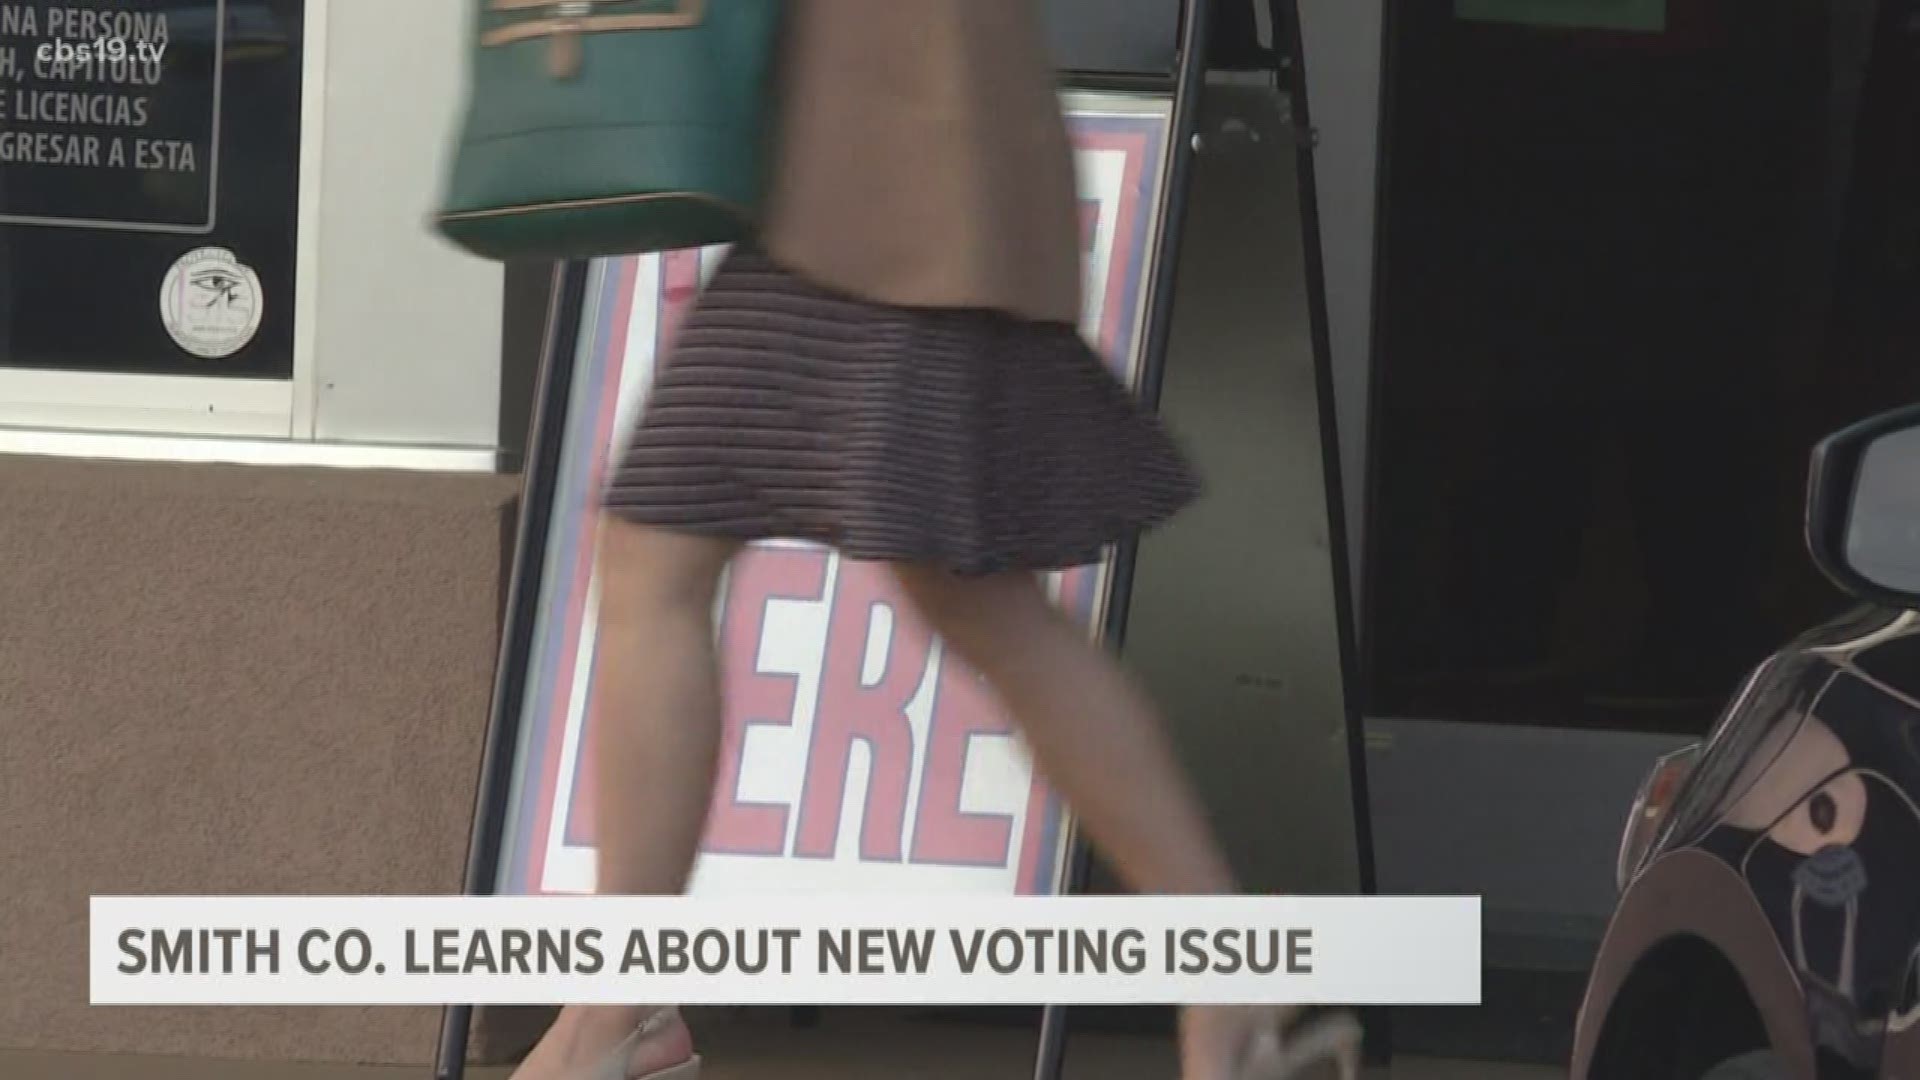 A week after the November 5 election, a new voting issues has been brought to Smith County official's attention.